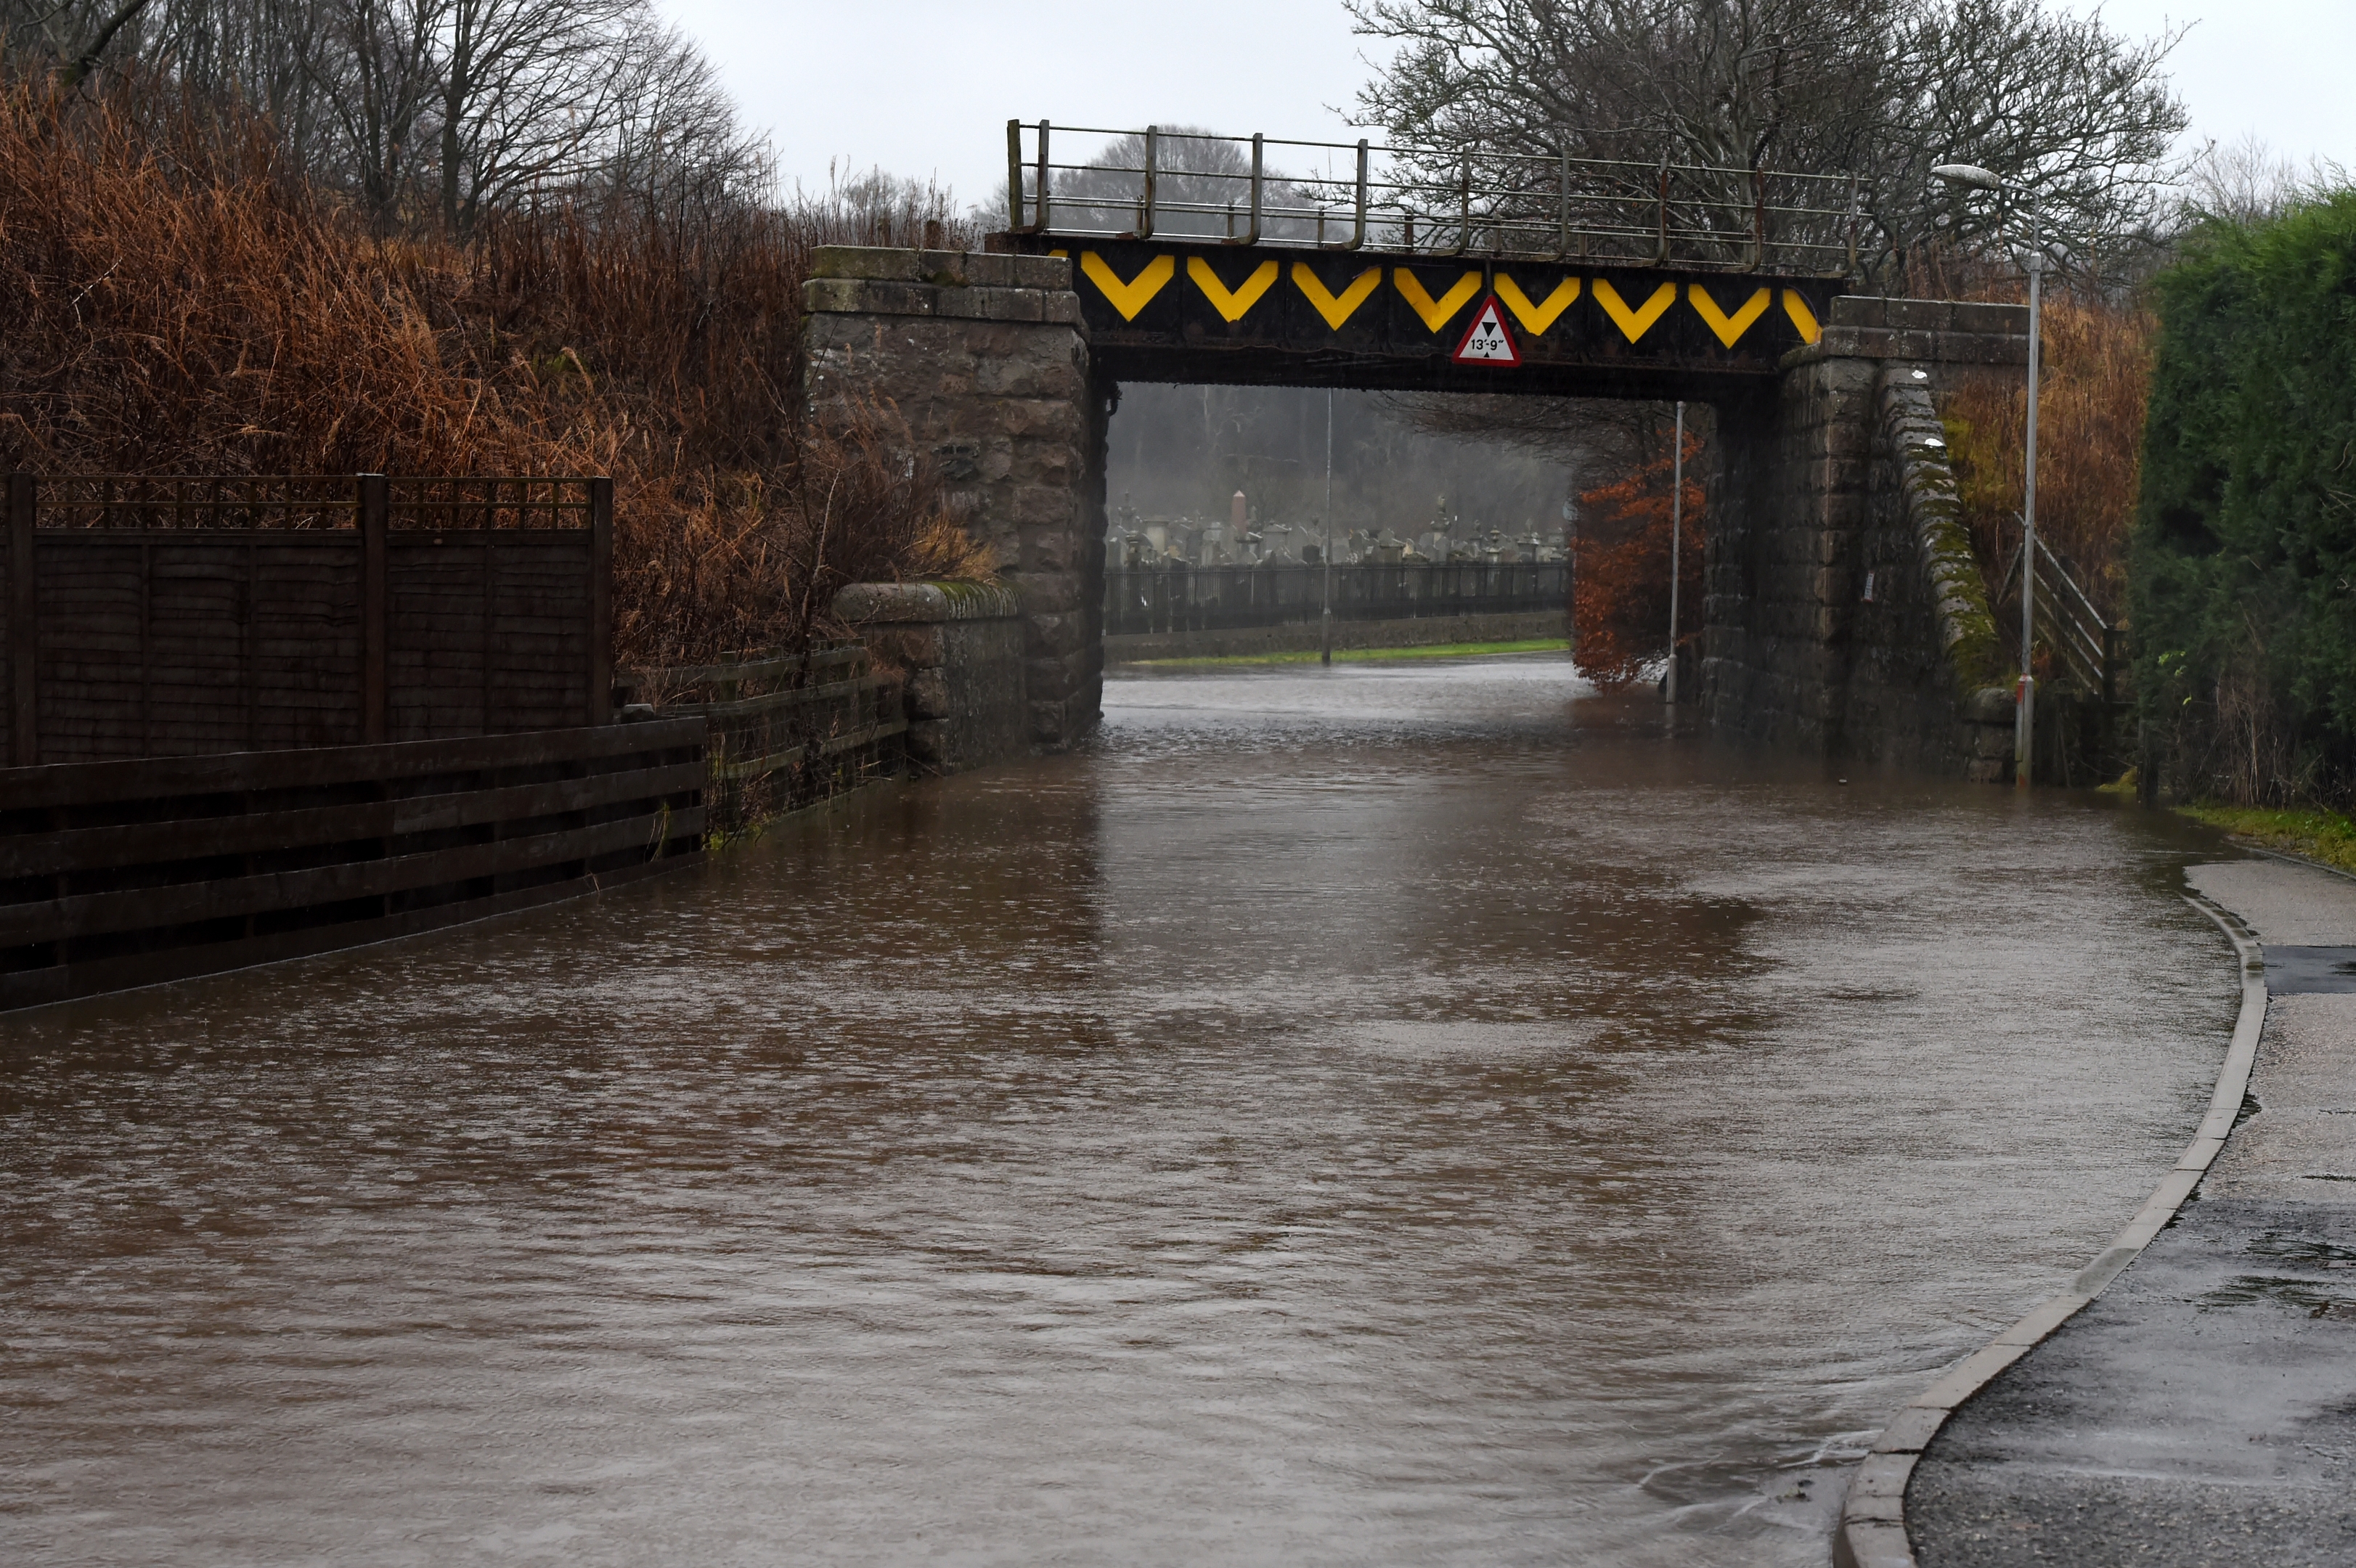 The B993 is closed in both directions between the A947 junction in Whiterashes and the St Jamess Place junction in Inverurie, because of flooding.